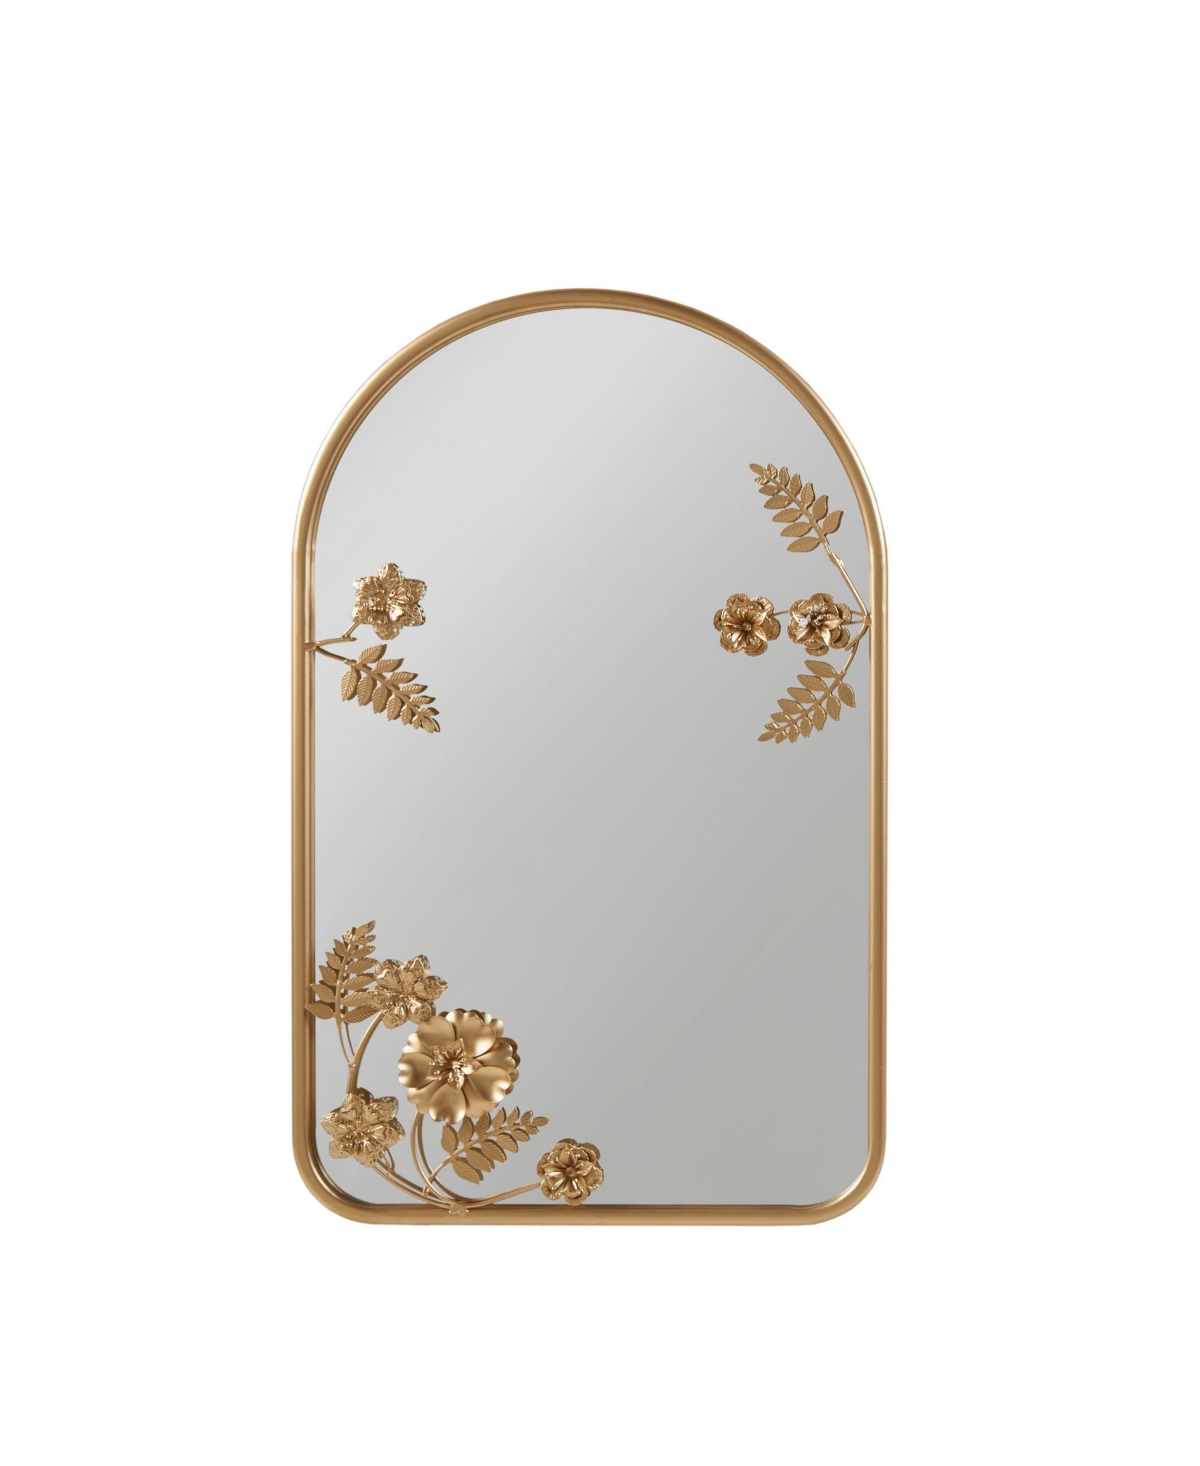 Adaline 16" x 26" x 2" Arched Metal Floral Wall Mirror - Gold